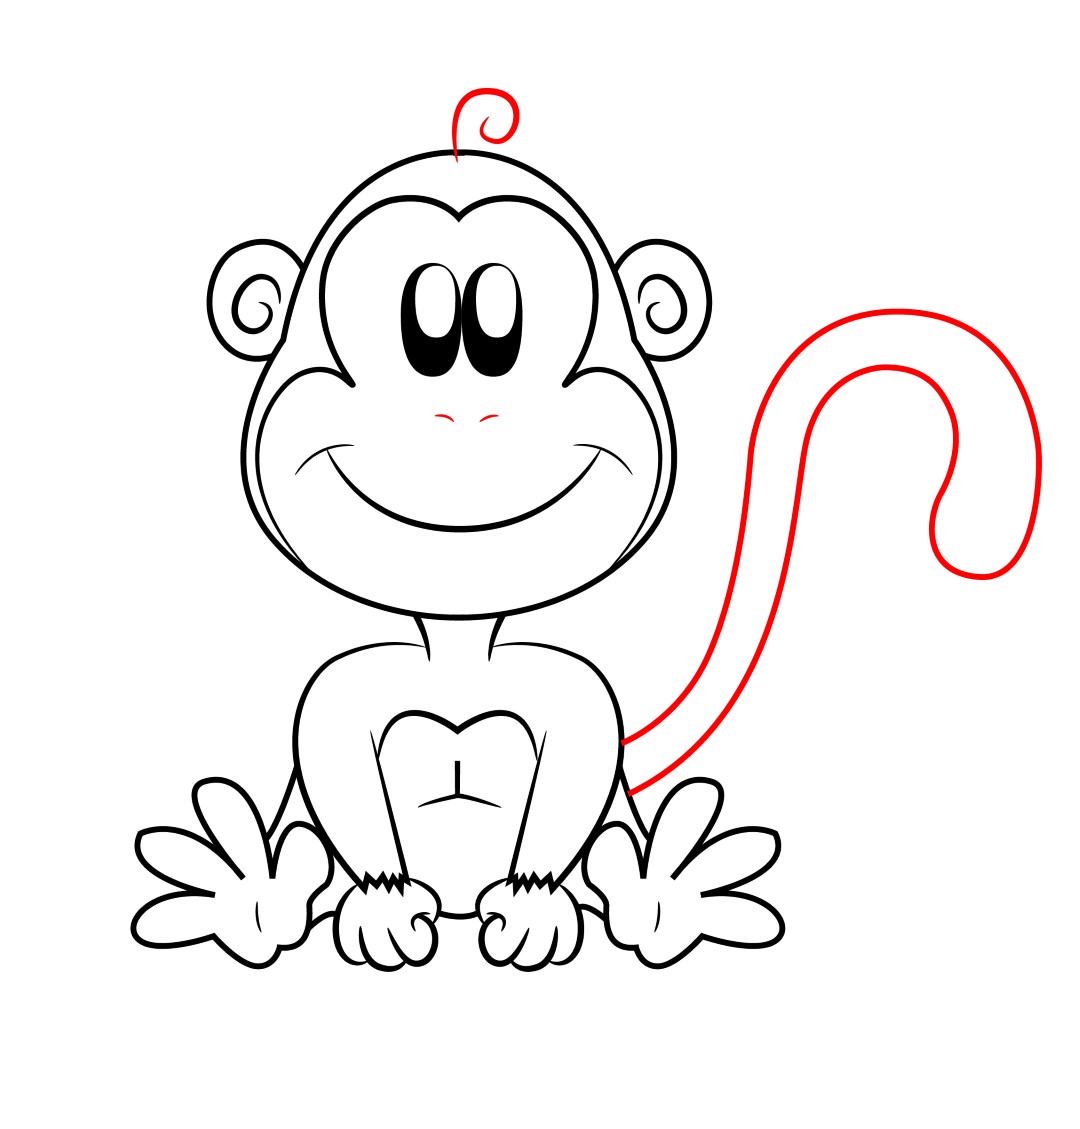 Monkey Drawing Cartoon Images & Pictures - Becuo